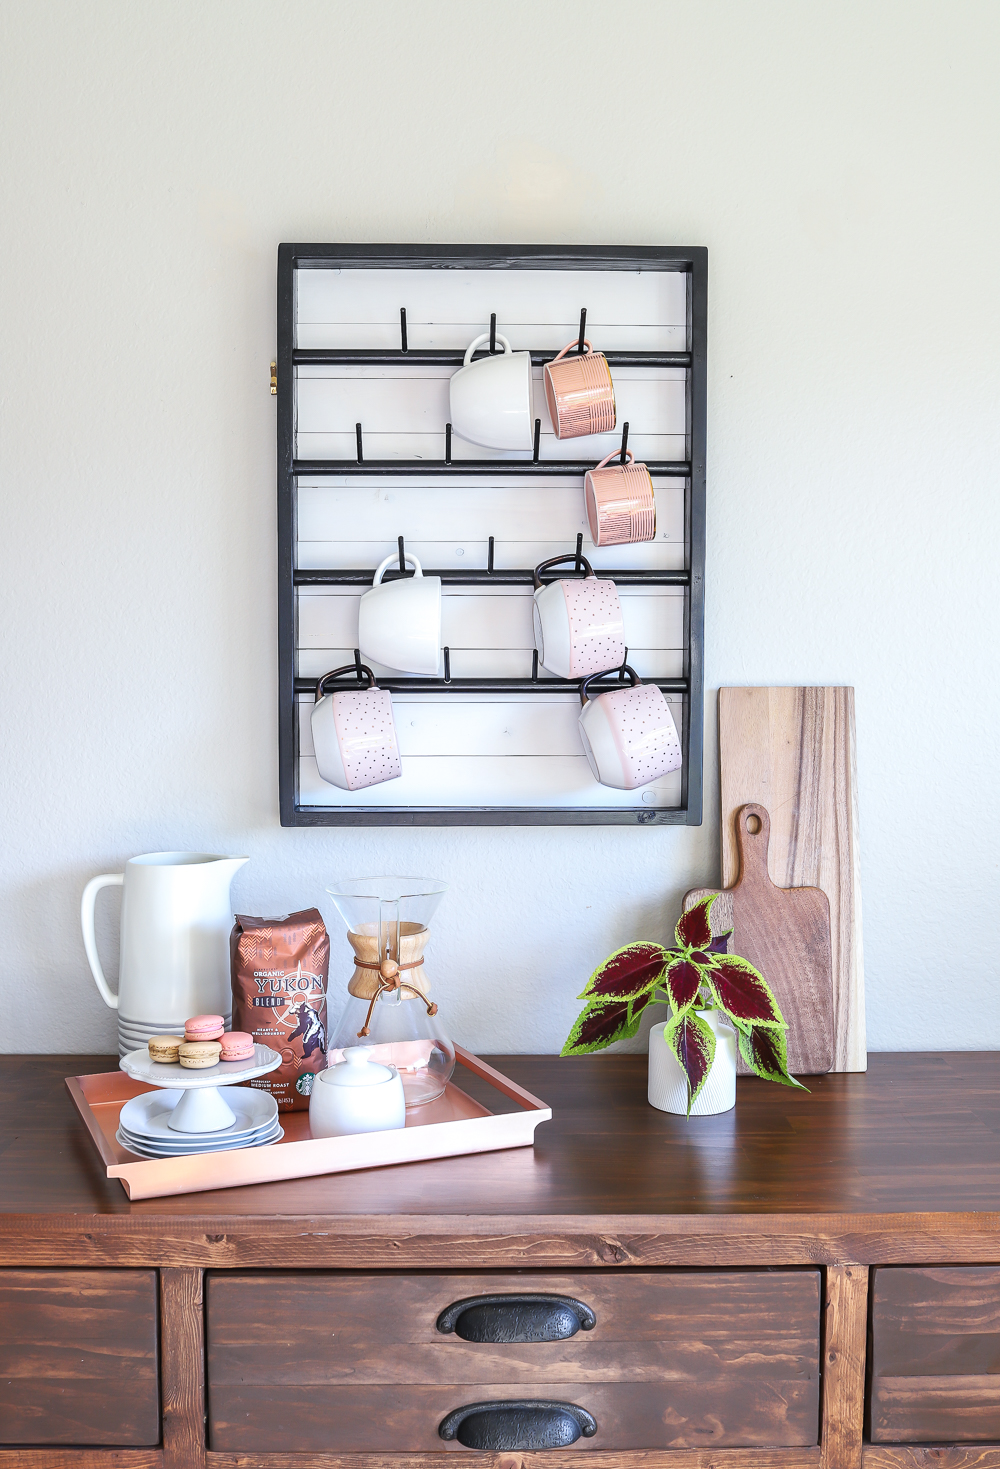 Kitchen Decorating Ideas: Instead of keeping your prized coffee mug collection hidden behind closed doors, put them out for the world to see! A coffee mug rack, like this one, helps to keep them tidy and within reach for your morning cup of joe.  